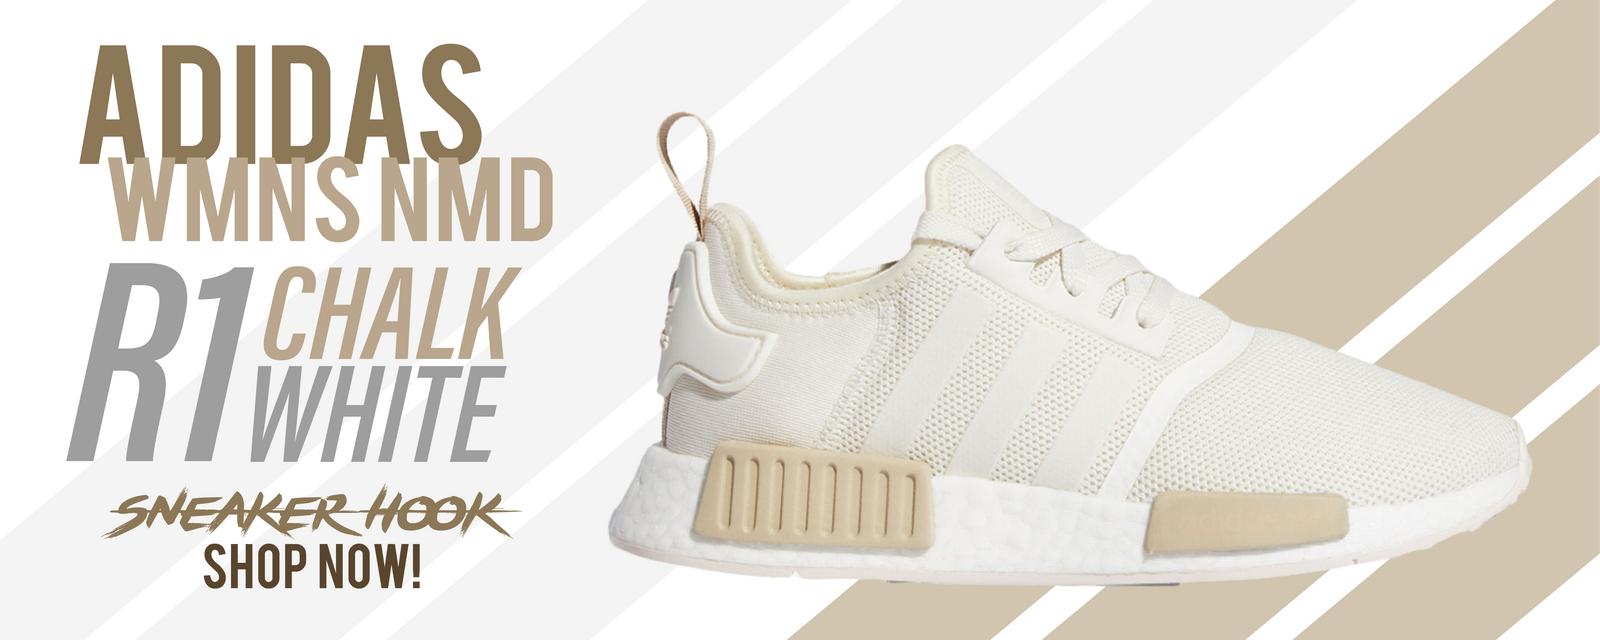 WMNS NMD R1 Chalk White Clothing to 